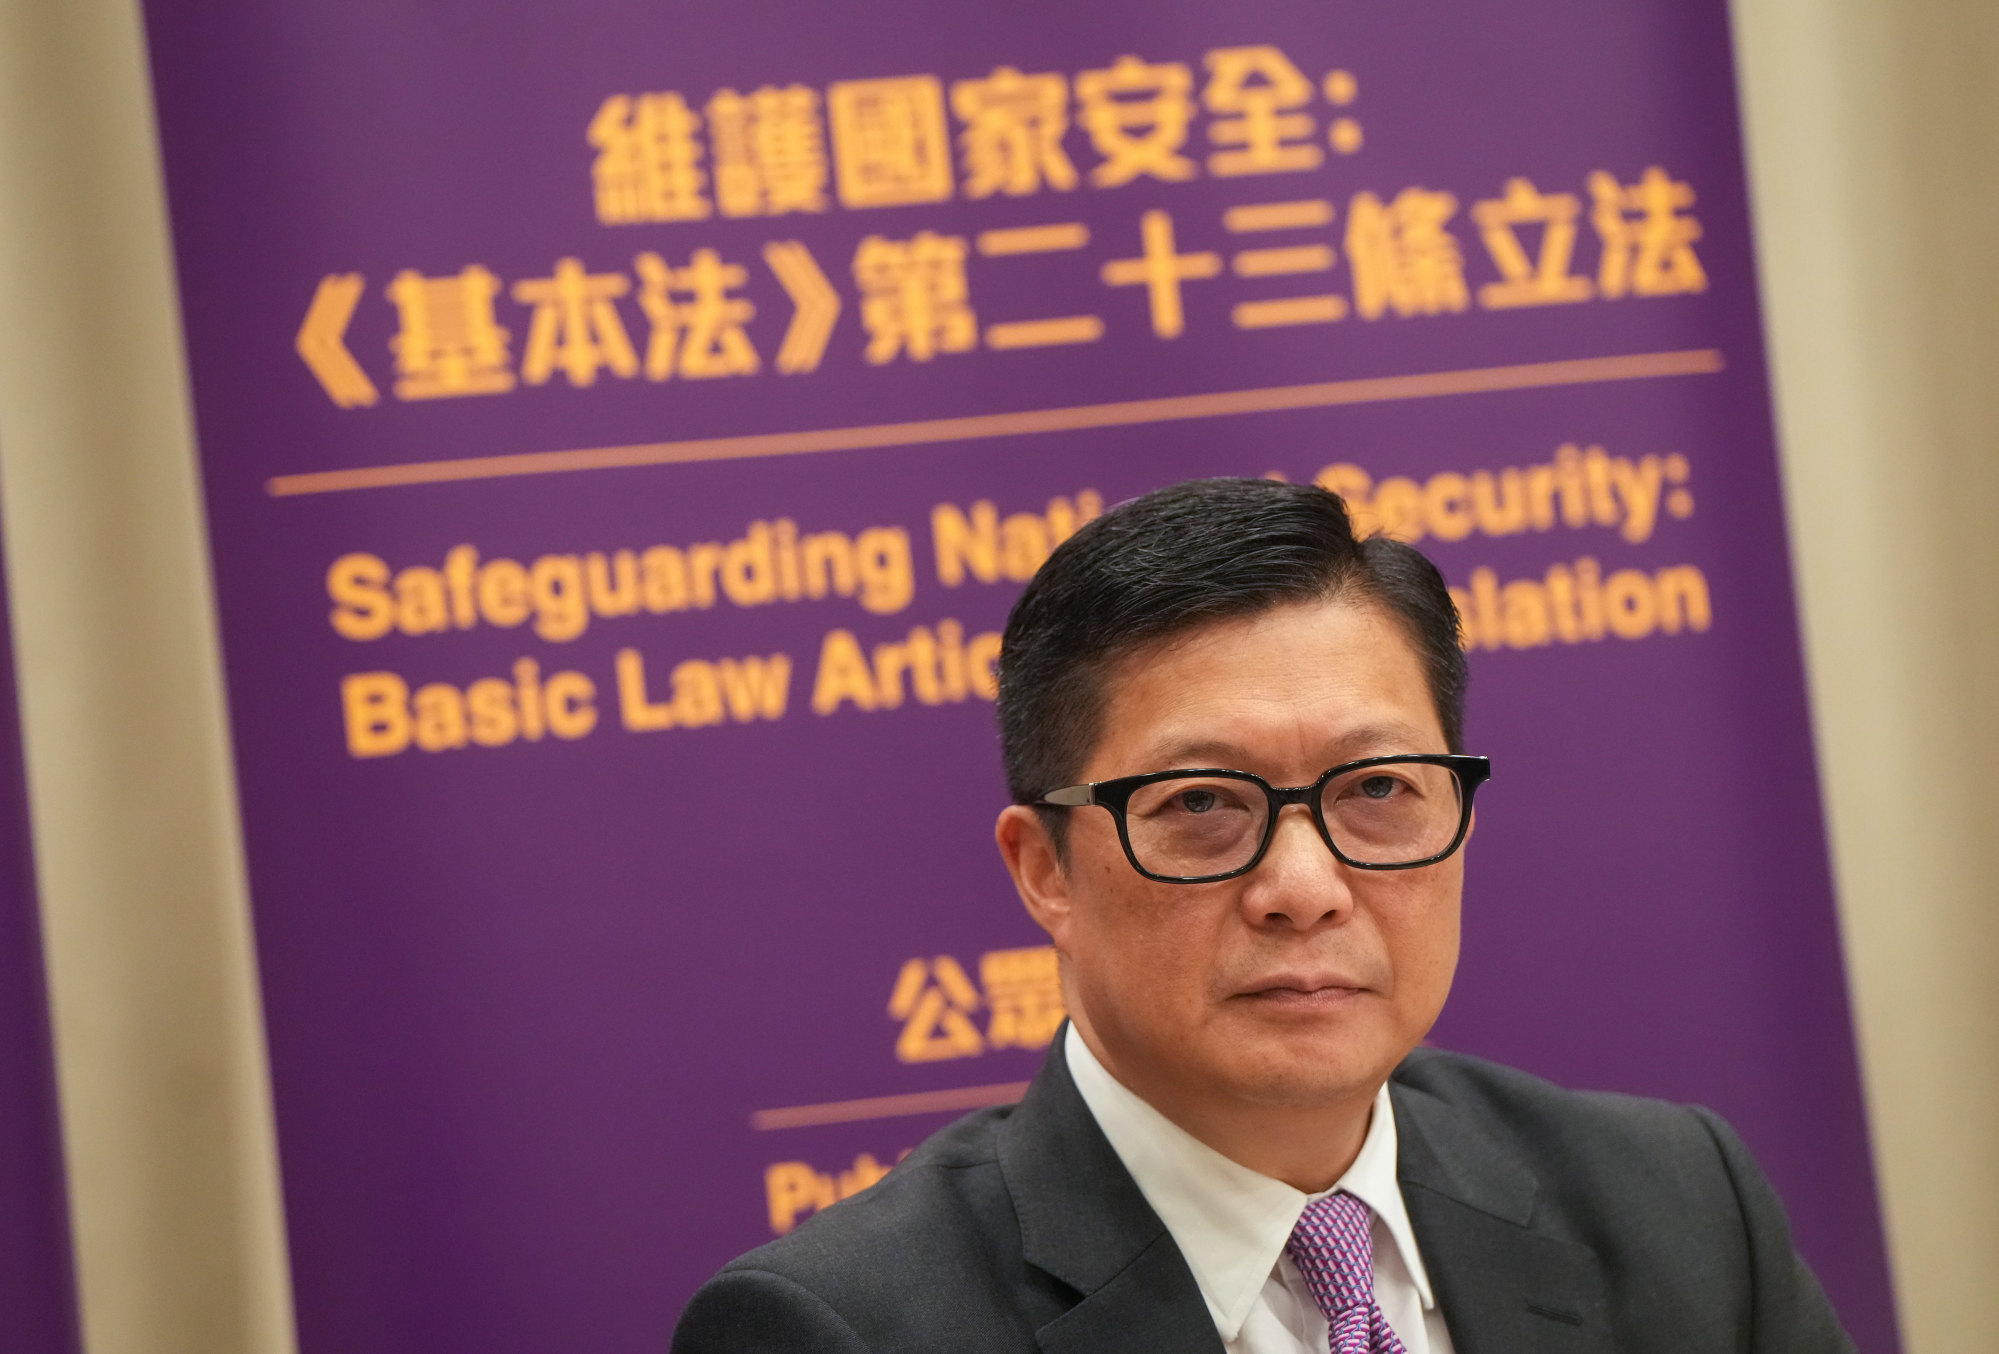 Hong Kong leader’s powers to make subsidiary legislation in Article 23 law will help address risks swiftly, security minister says